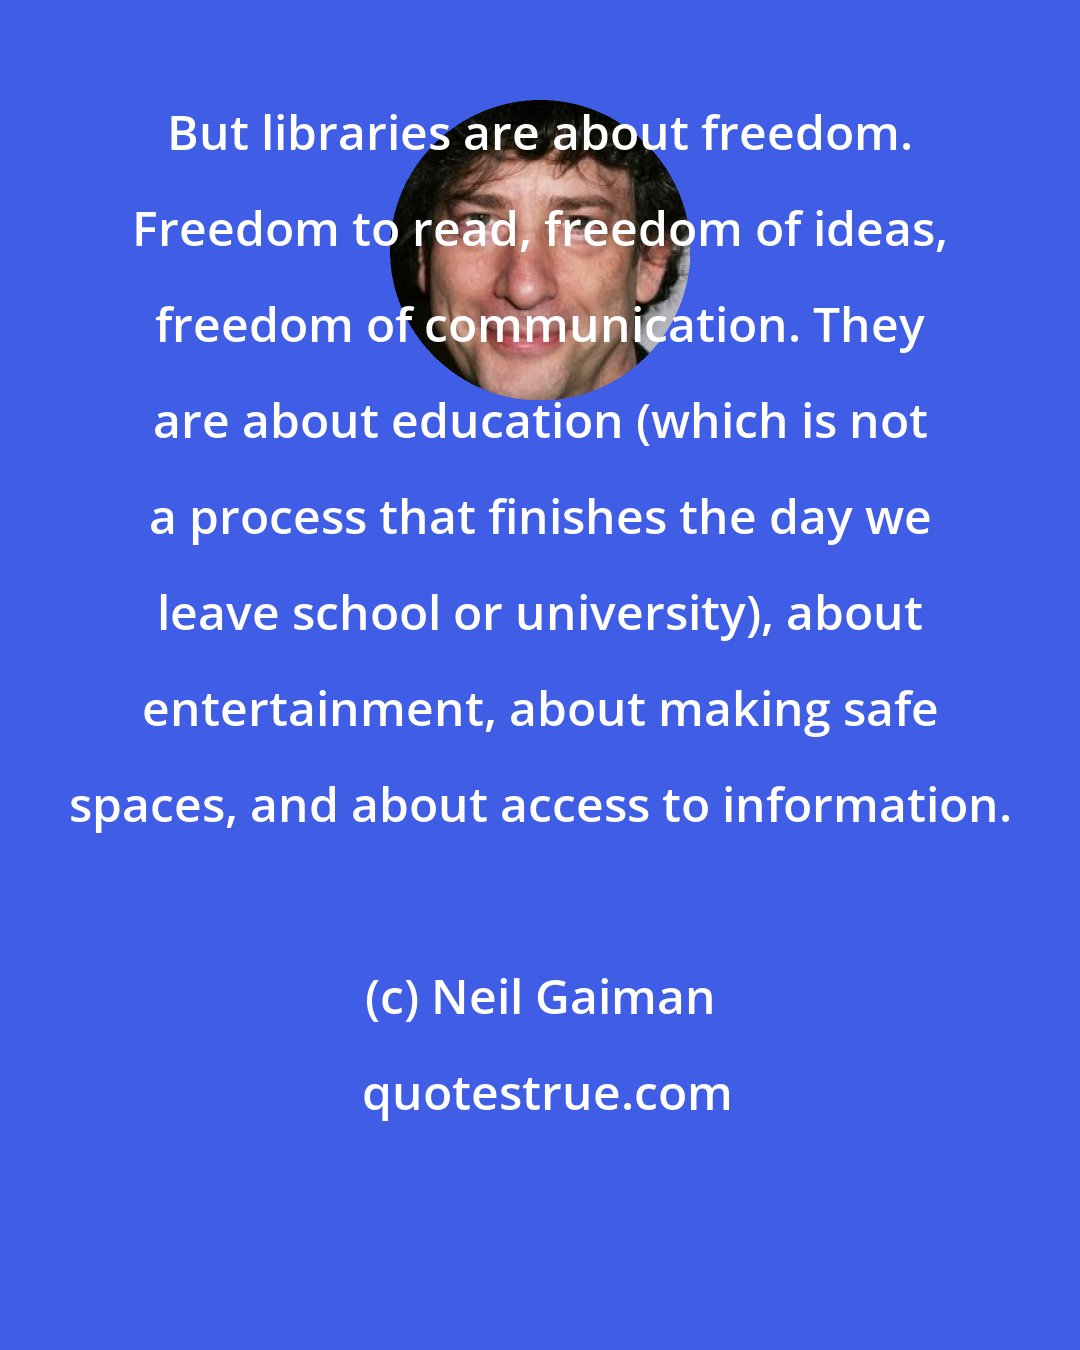 Neil Gaiman: But libraries are about freedom. Freedom to read, freedom of ideas, freedom of communication. They are about education (which is not a process that finishes the day we leave school or university), about entertainment, about making safe spaces, and about access to information.